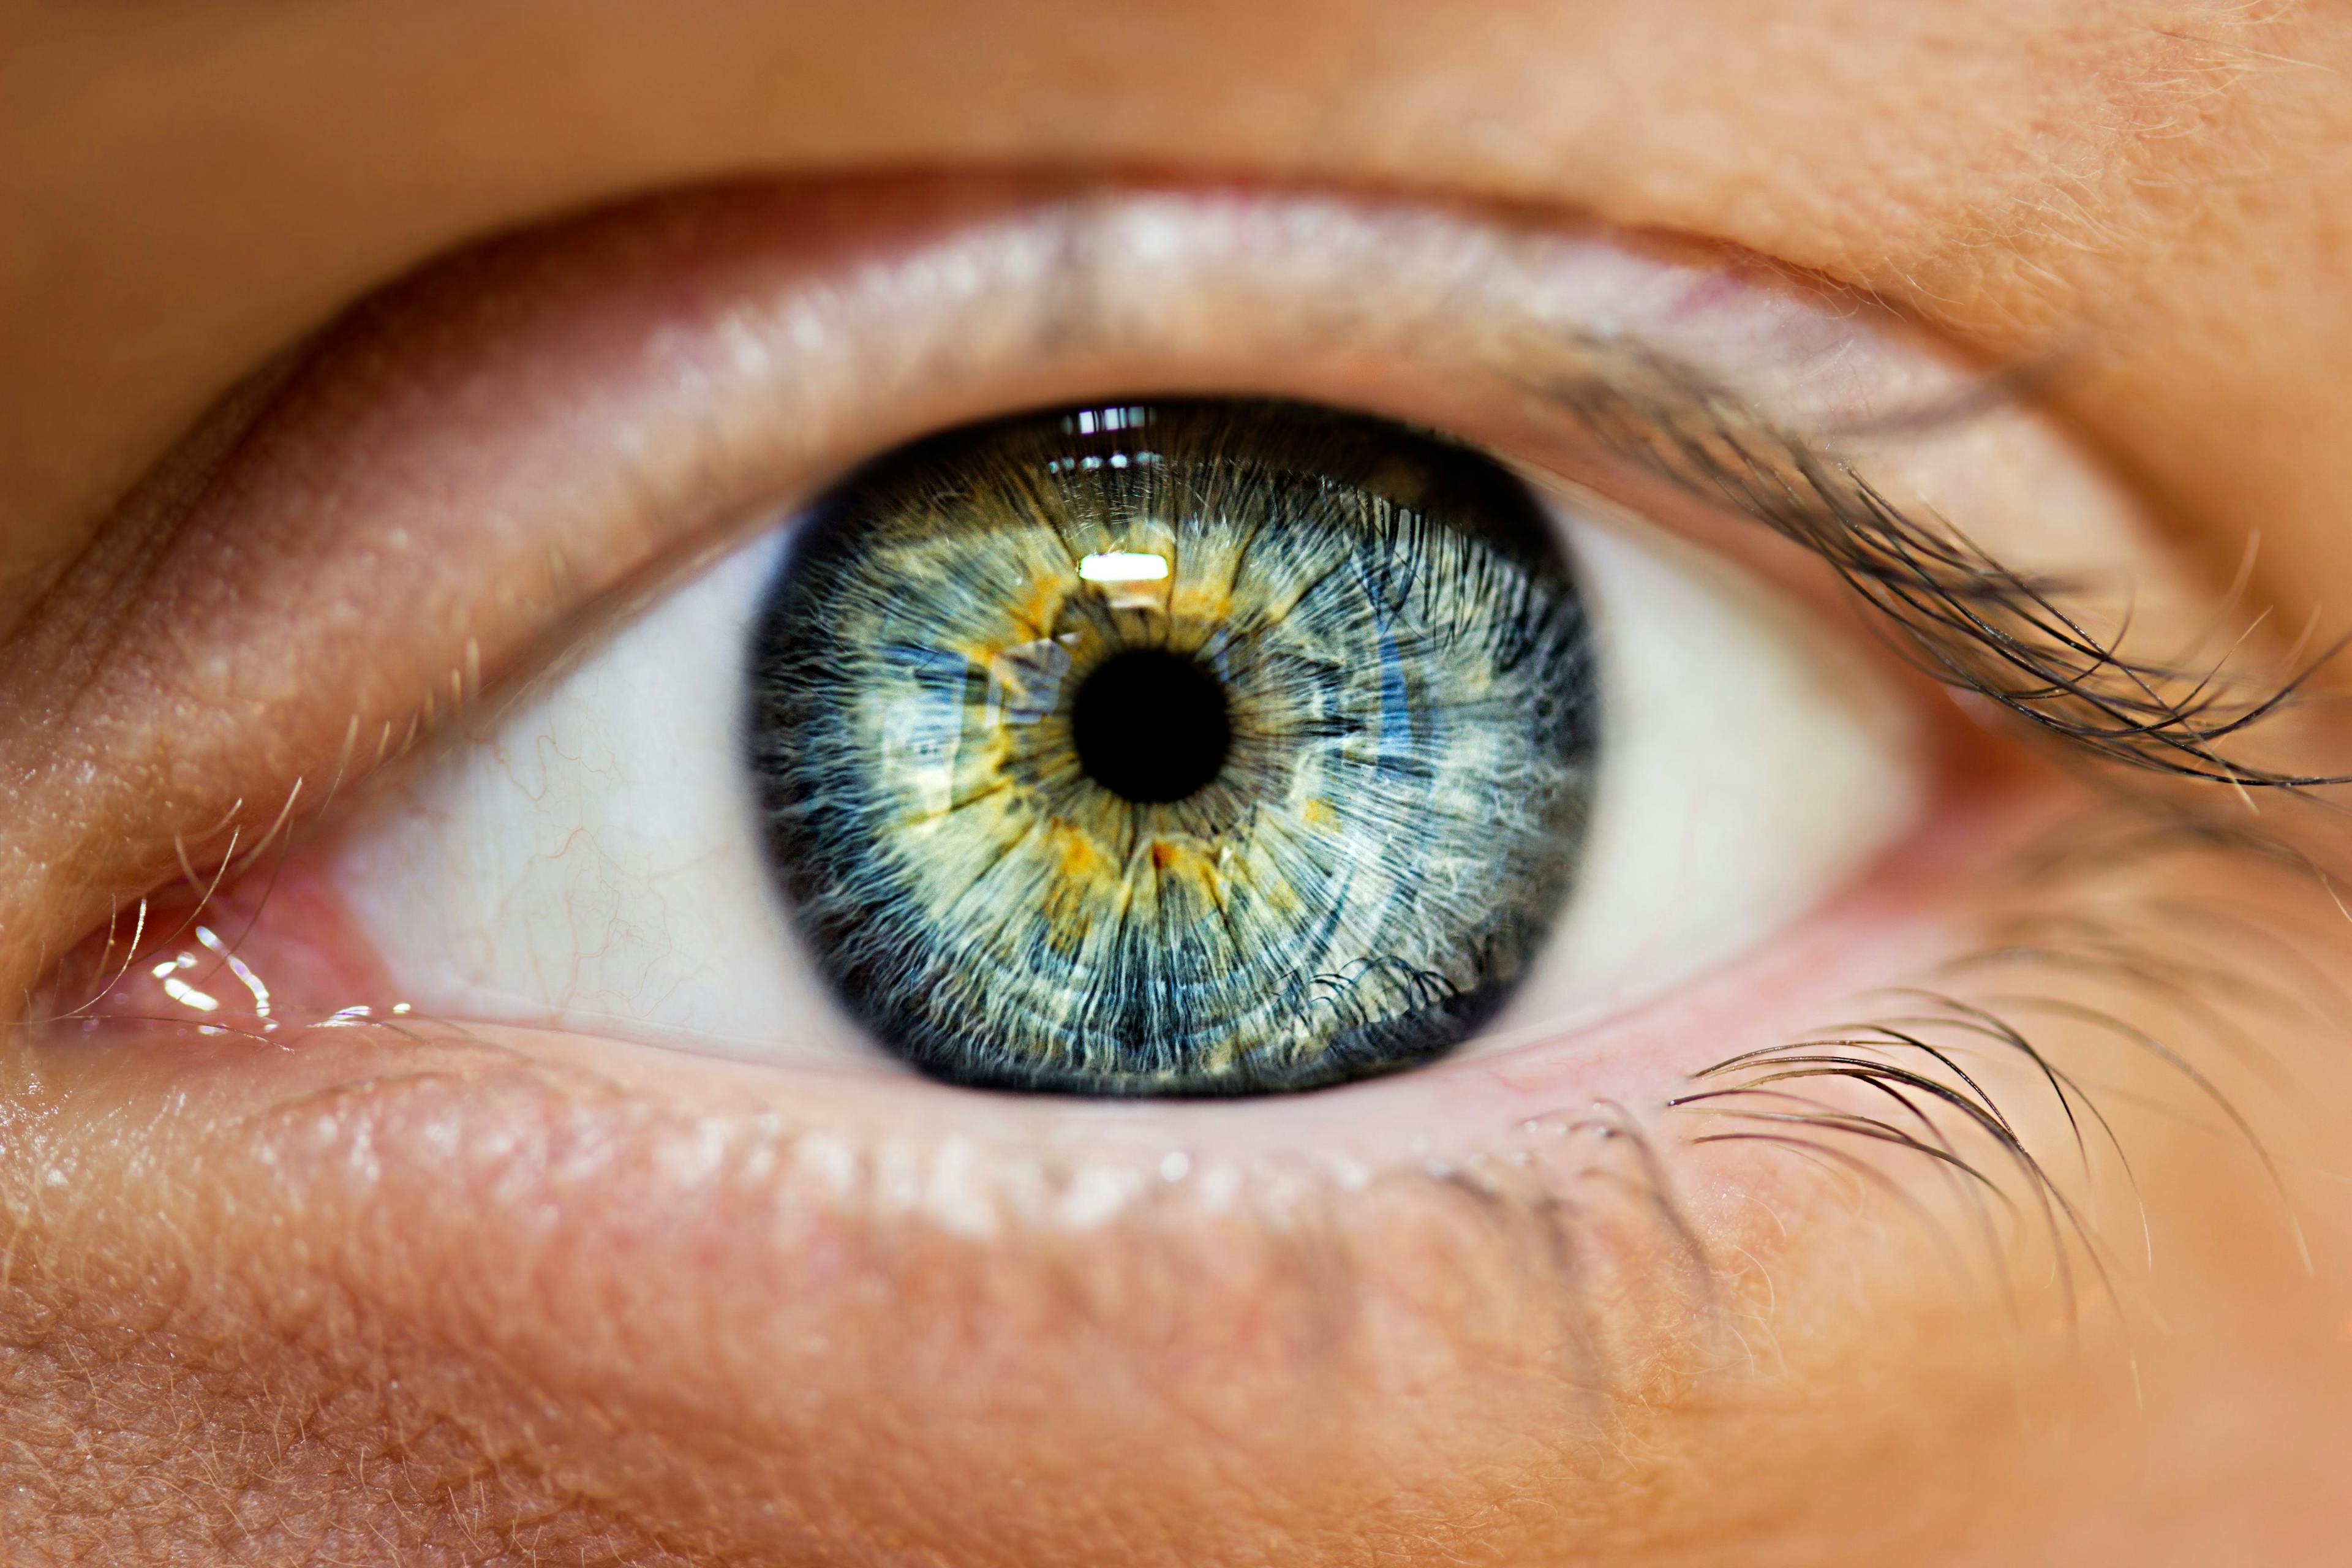 Aflibercept biosimilars are approved to treat wet AMD, diabetic macular edema, and diabetic retinopathy. | image credit: Victoria Key - stock.adobe.com